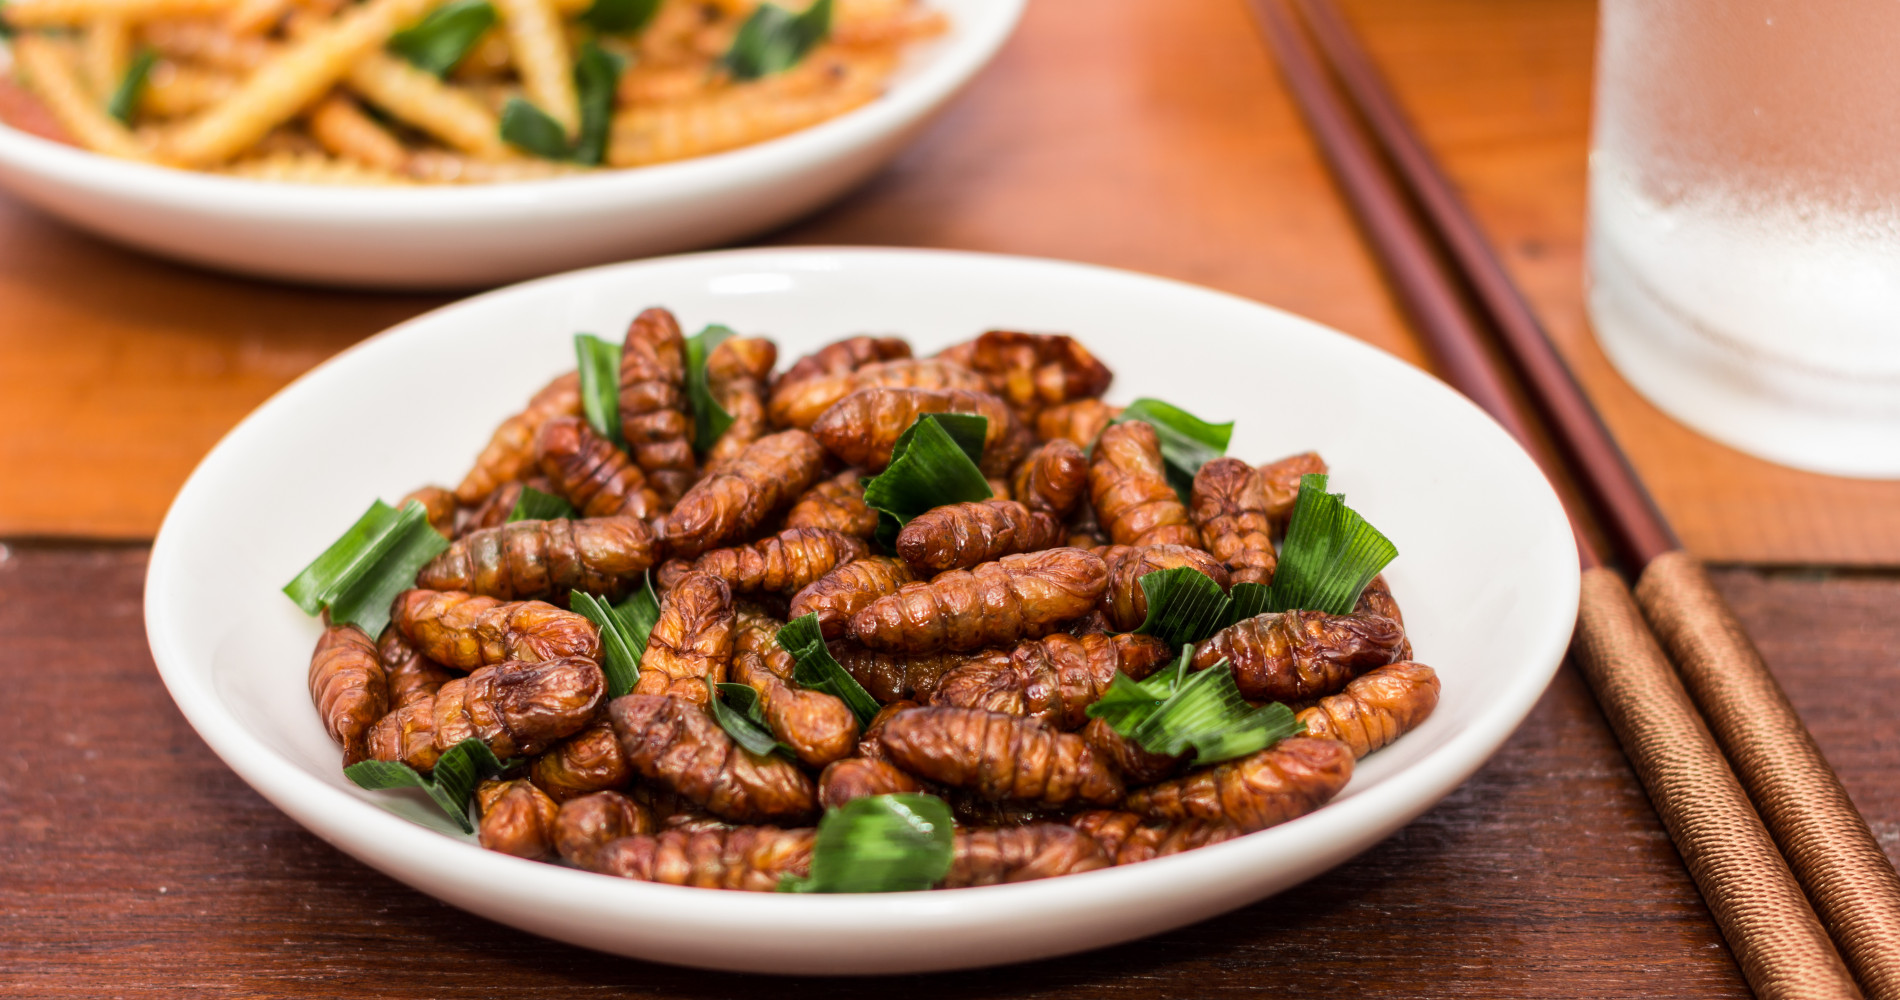 entomophagy - the practise of eating insects